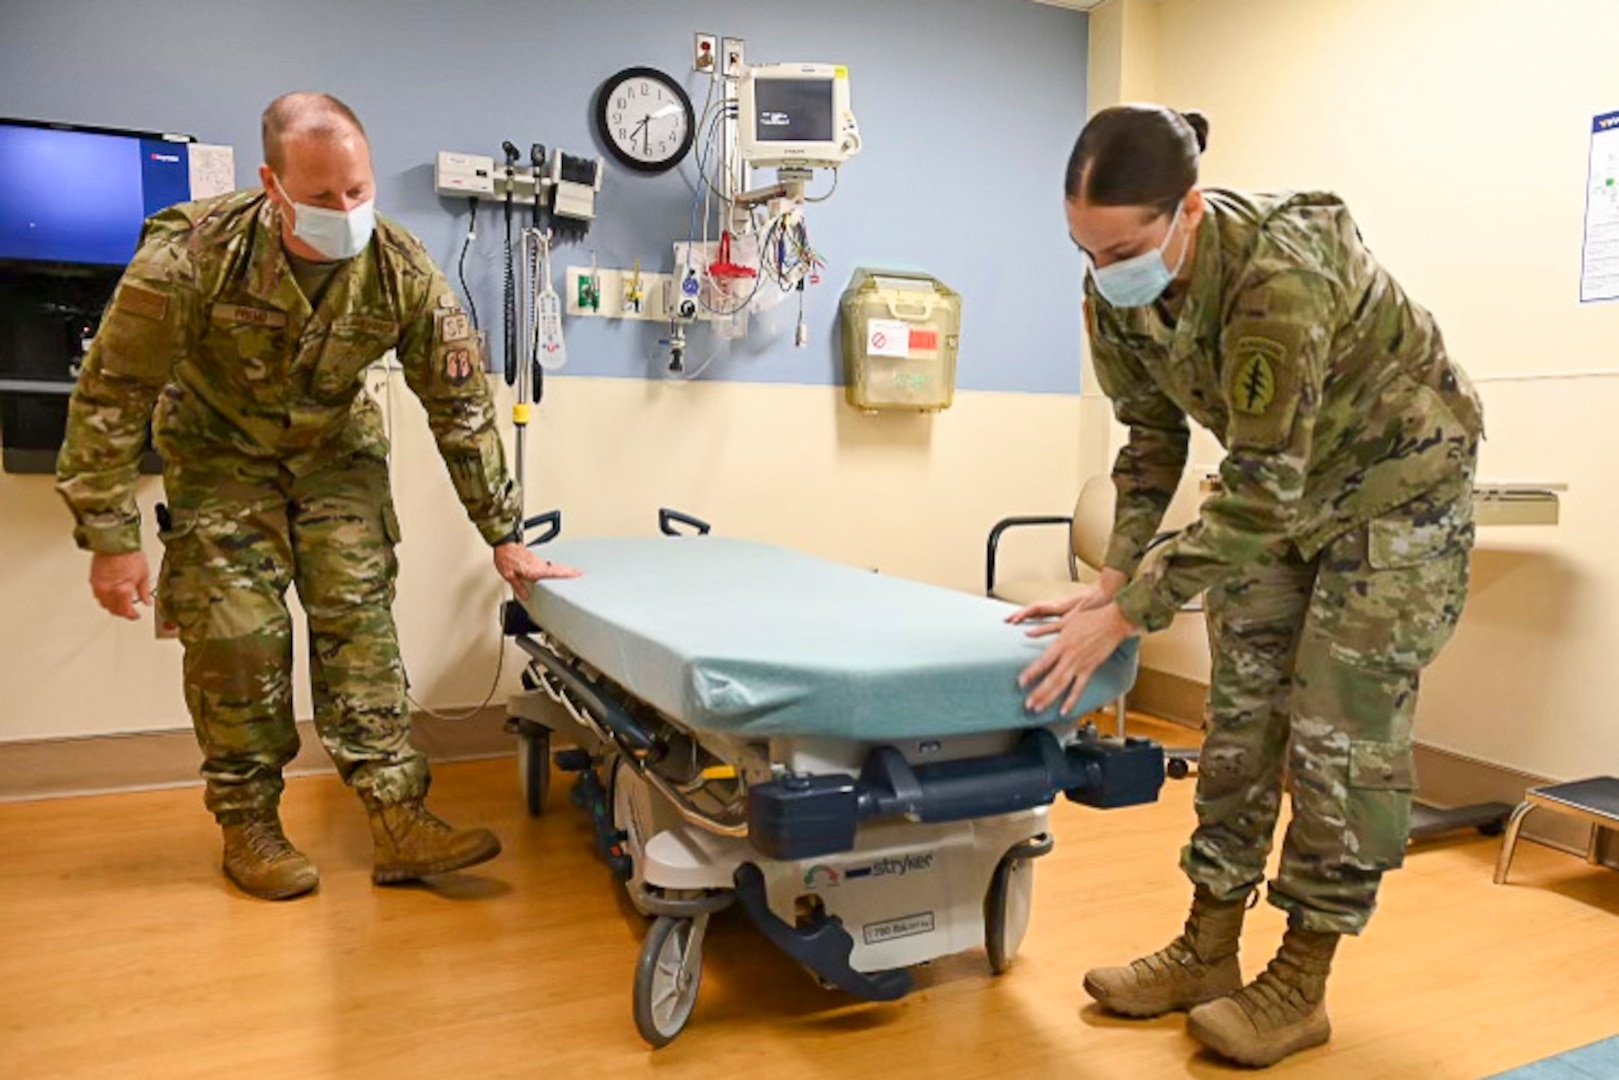 U.S. Air Force Master Sgt. Derek Premo, a flight chief for the 167th Security Forces Squadron, and U.S. Army Spc. Tamara Bumgardner, a motor vehicle operator for the 1528th Forward Support Company, Special Operations (Airborne), prepare a patient examination bed in a room at Jefferson Medical Center in Ranson, West Virginia. West Virginia Guardsmen have been assisting in hospitals throughout the state since January.